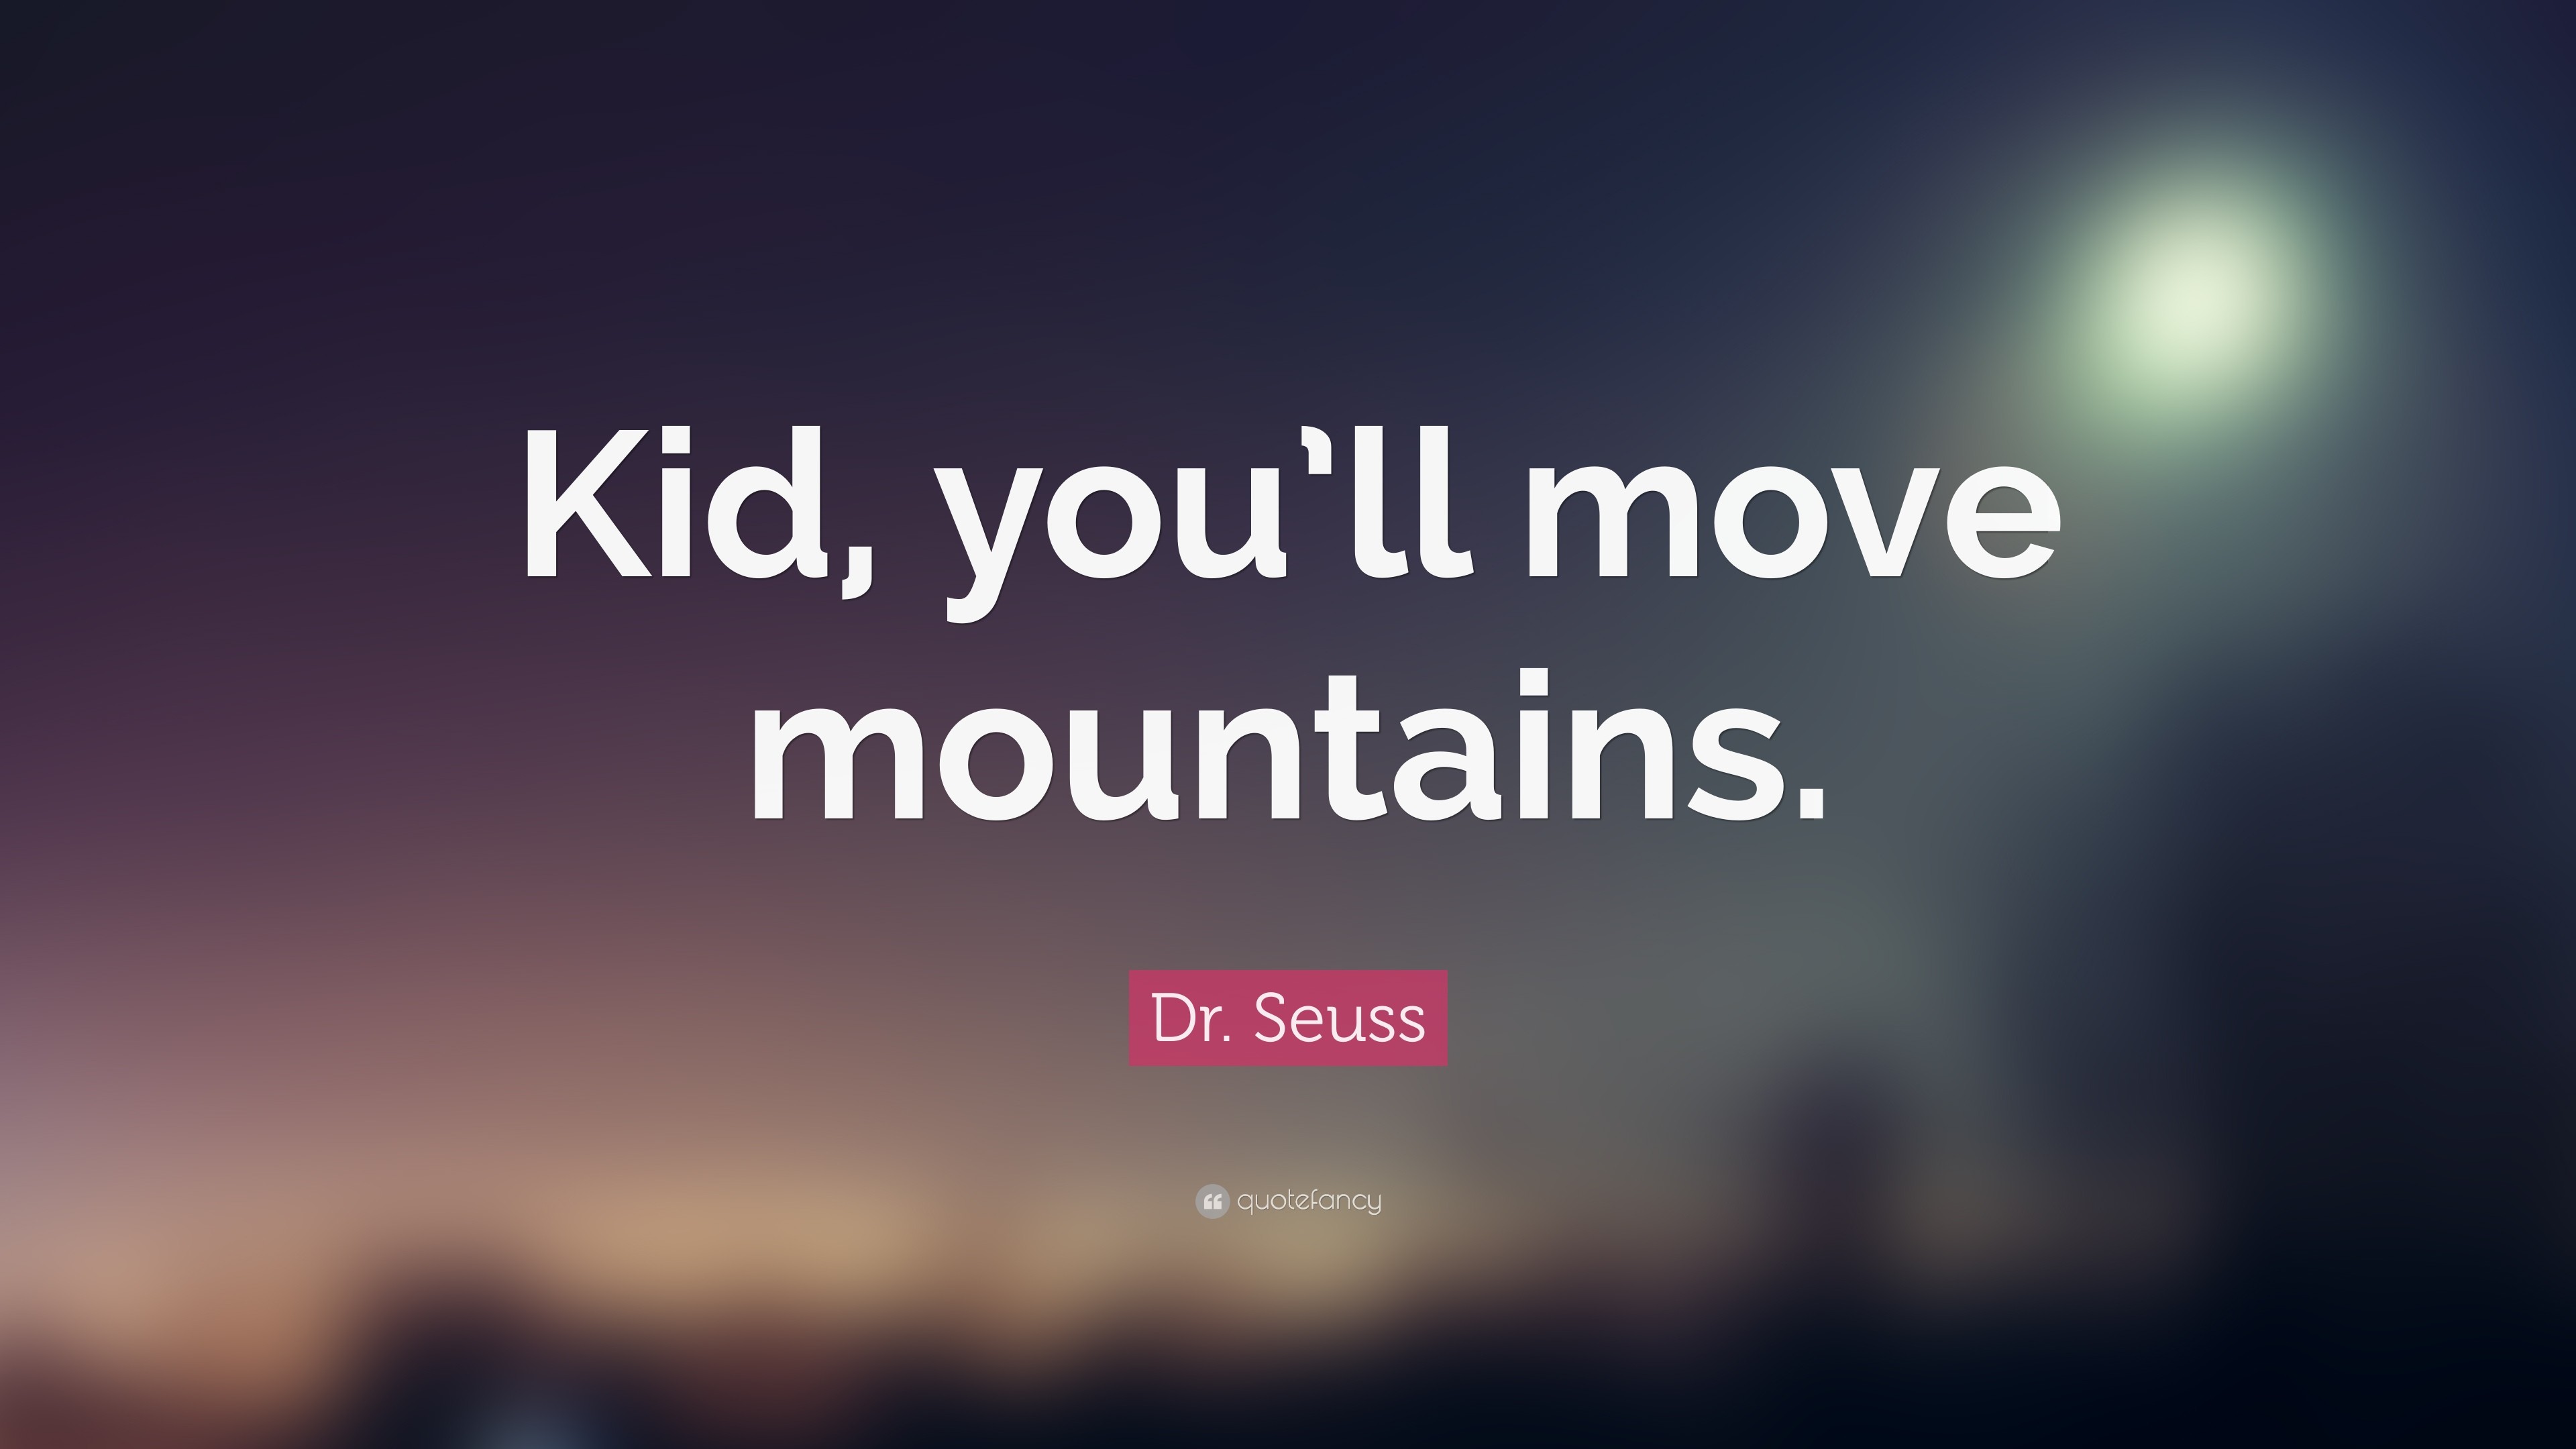 3840x2160 Dr. Seuss Quote: “Kid, you'll move mountains.”